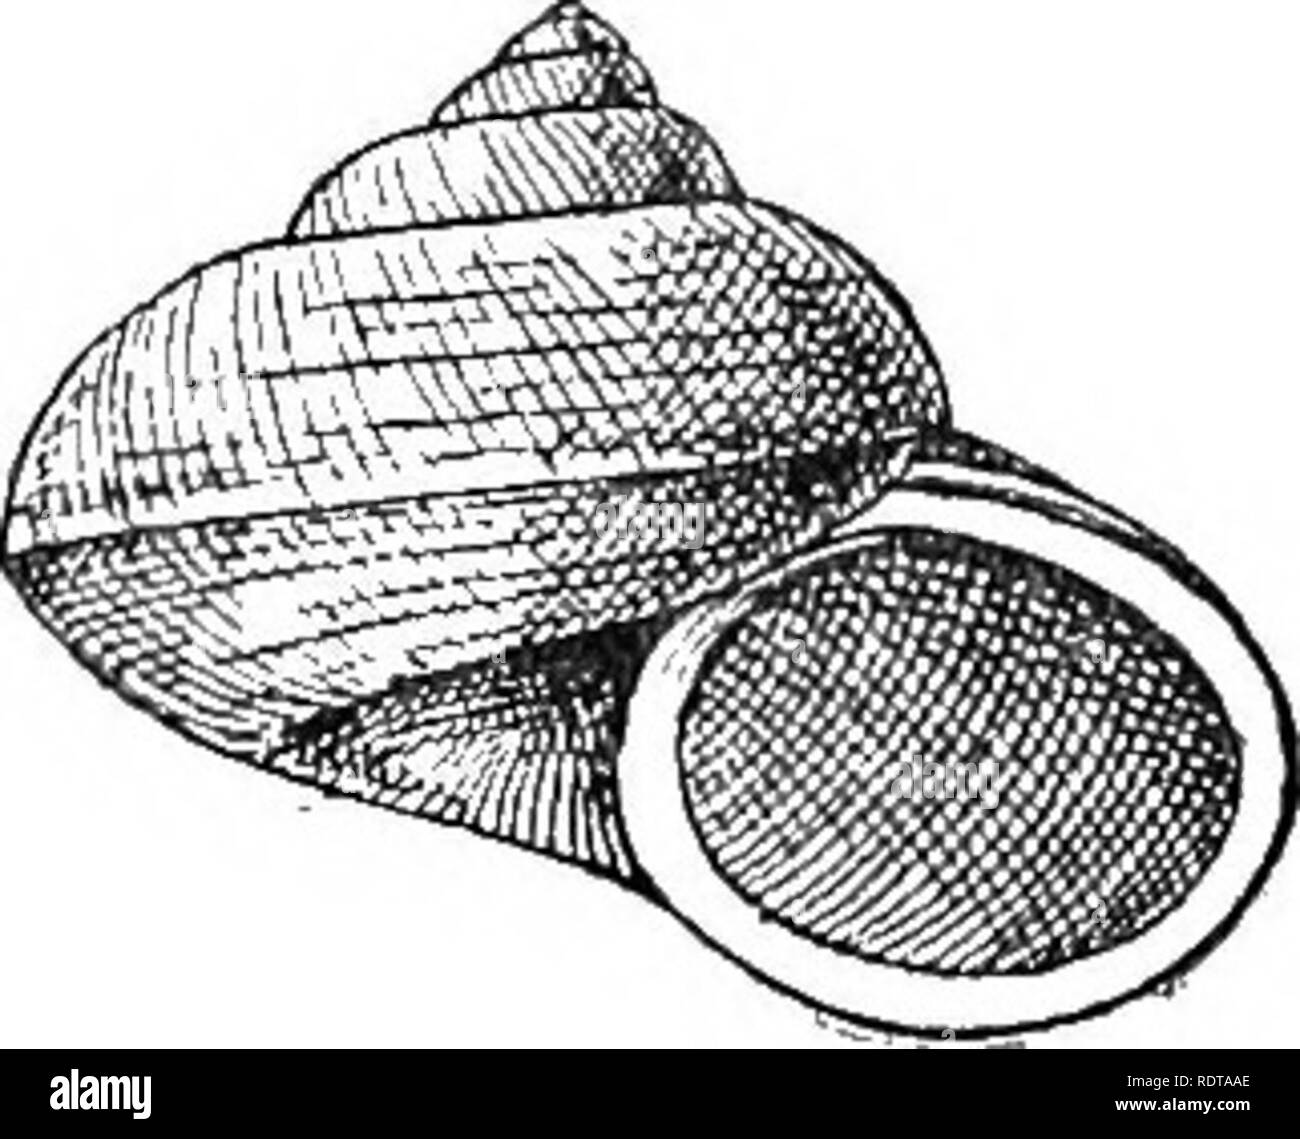 . Mollusca ... Mollusks. CYCLOPHOEUS. 55 &quot; With a general resemblance in form to G. indicus, Desli., it will be at once distinguished by the absence of a keel or acute spiral ribs, by the wider umbilicus, less developed peristome, and more elevated form. The very gradual arcuation of the columellar lip is also an essential character, detracting from the uniformity of the circular aperture. The sinus observable at this part, impinging on the plane of the aperture, is also conspicuous in C. indicus. &quot; A variety occurs in which the shell is of a pale buff colour, darker towards the apex Stock Photo